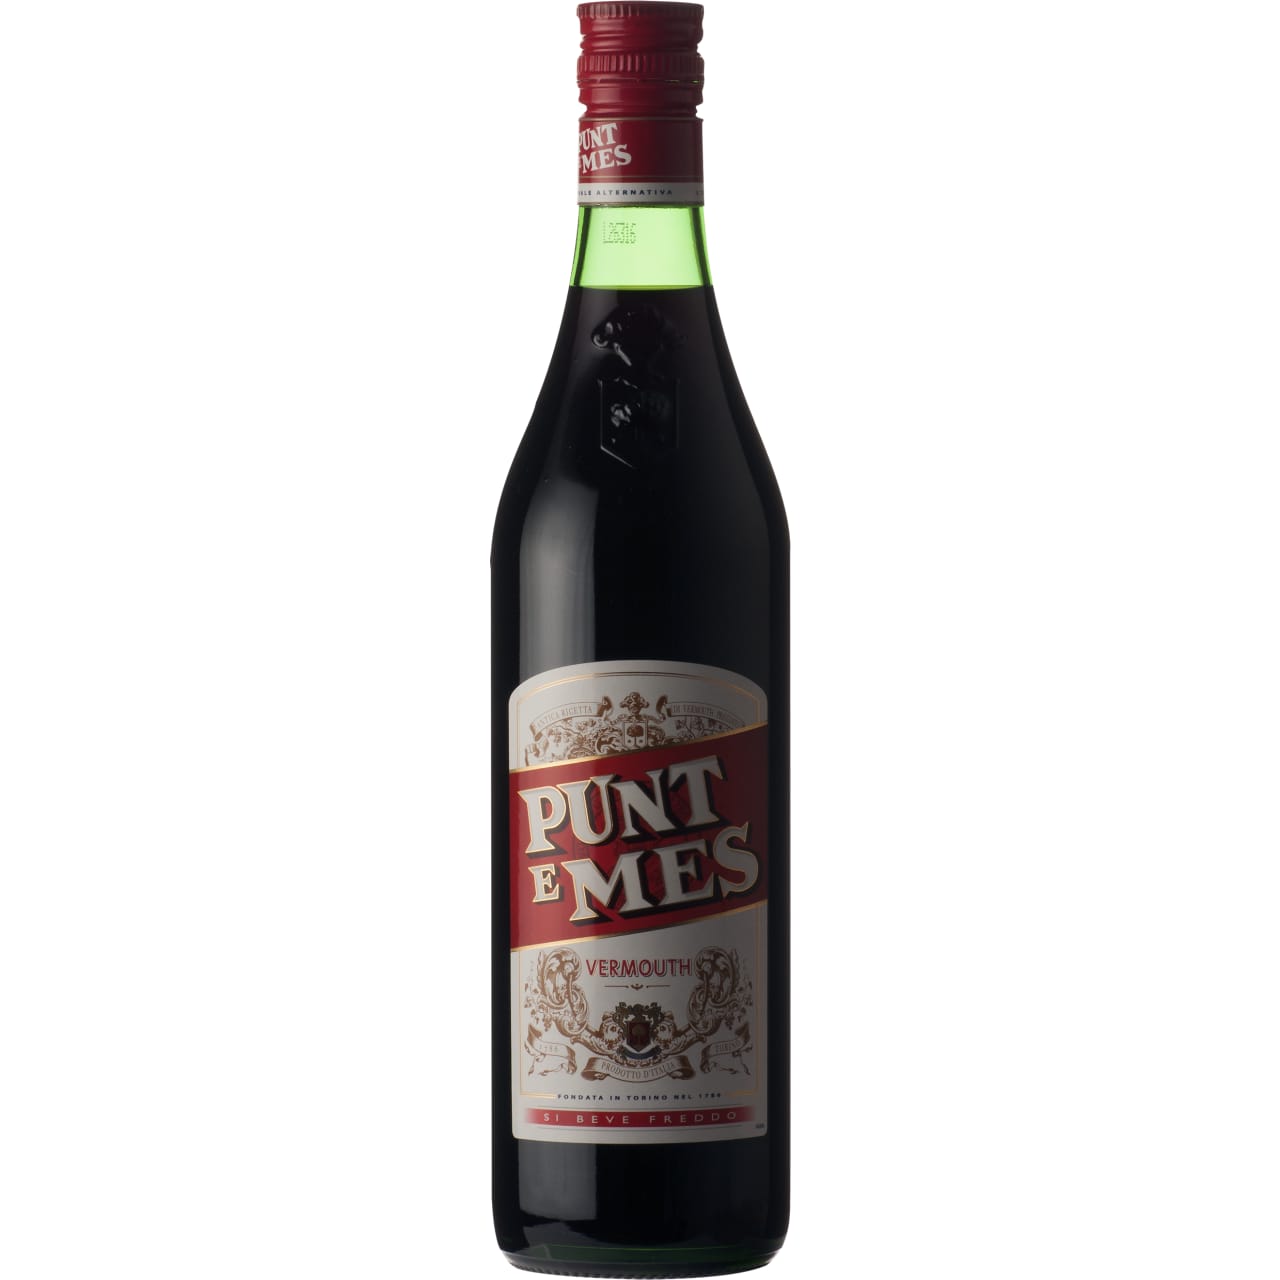 Punt E Mes is a sweet and classic red vermouth that contains a mix of 10 herbs and spices along with quinine (also found in tonic water), which contributes bitterness to its bittersweet flavour.